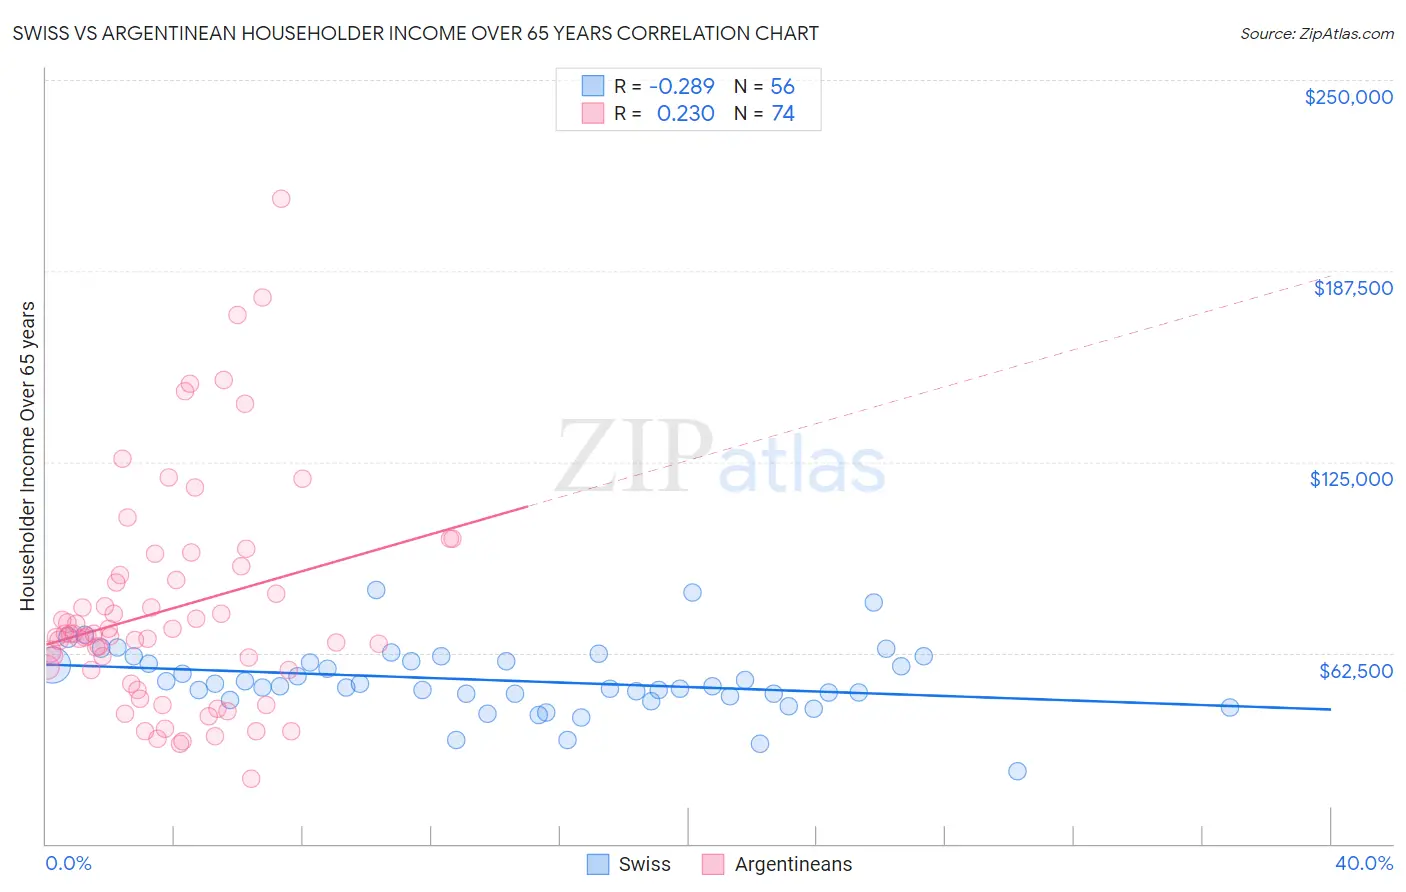 Swiss vs Argentinean Householder Income Over 65 years